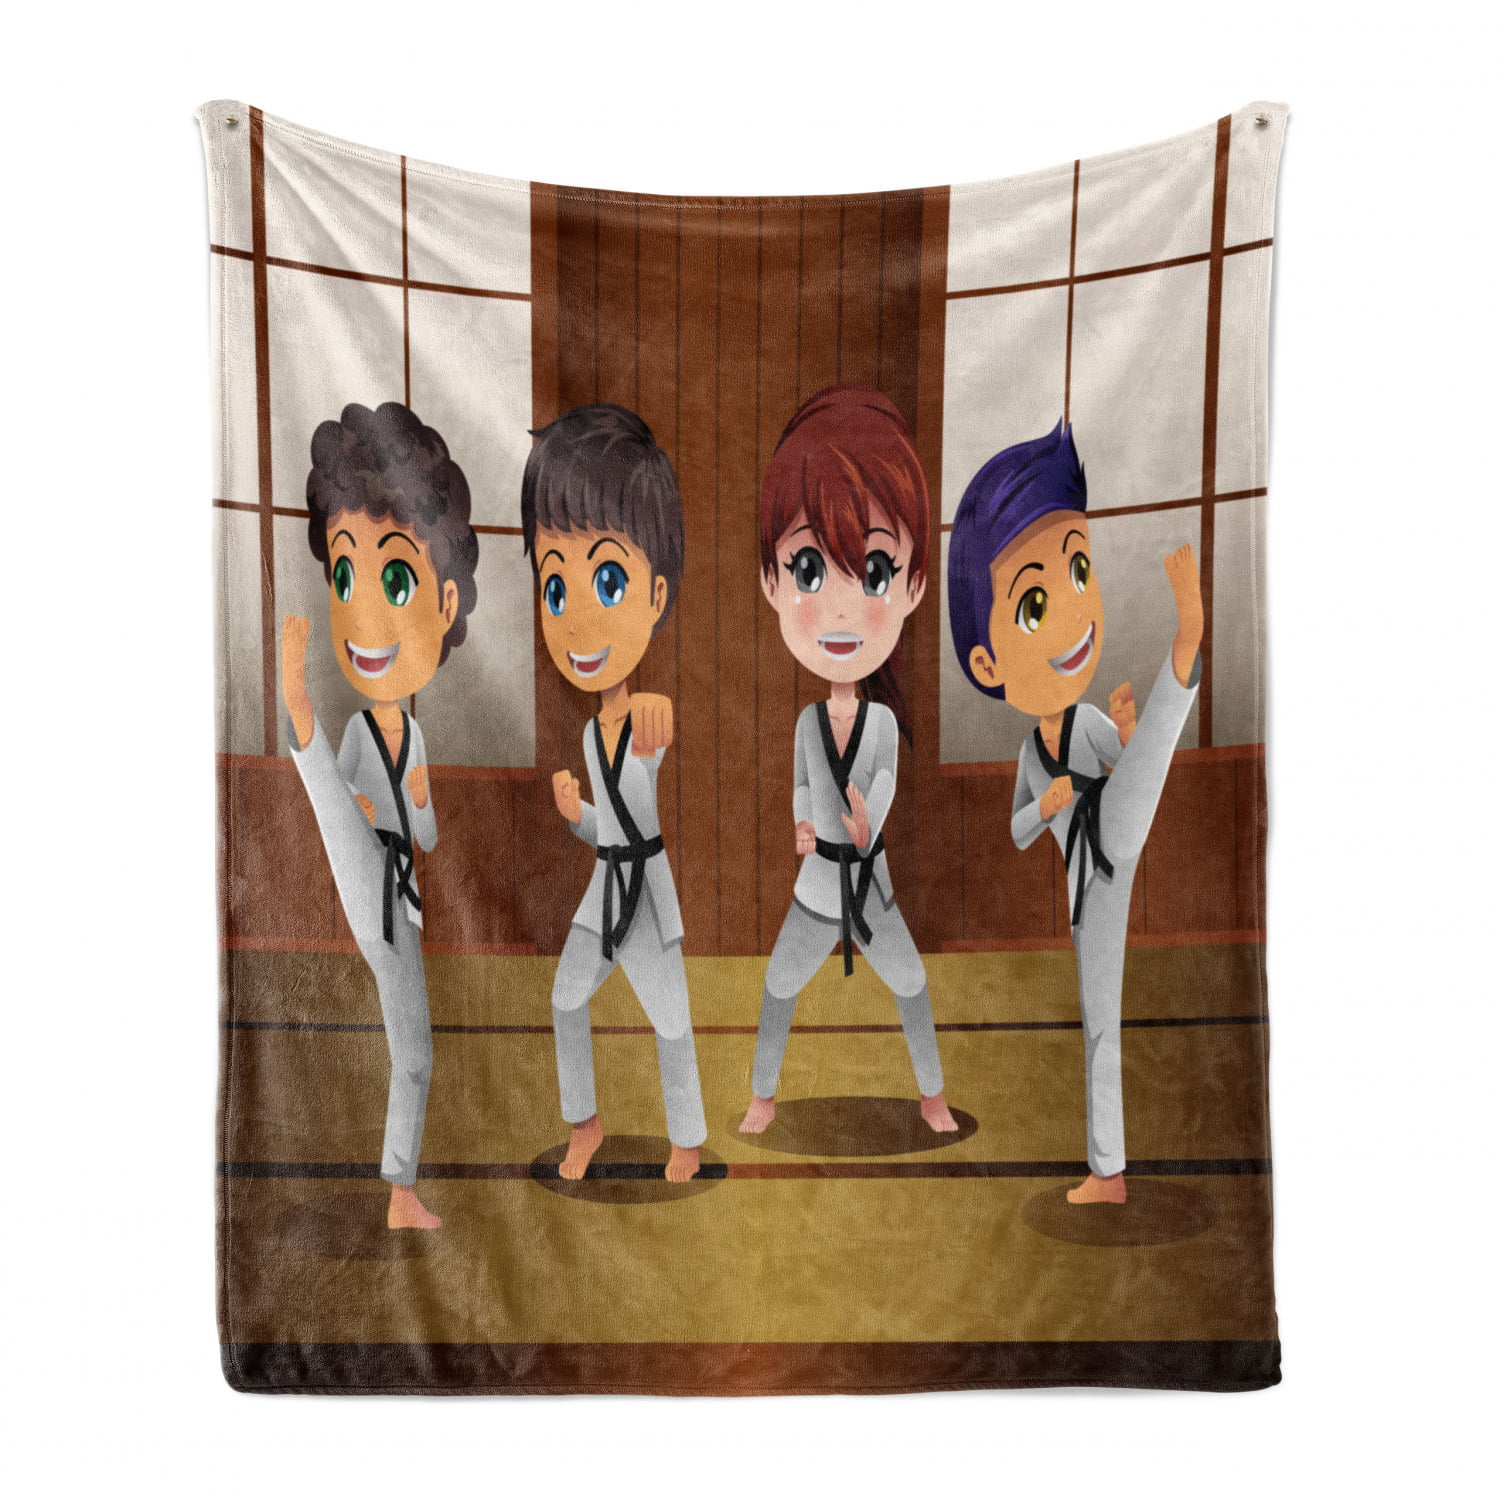 Personalized Karate Blanket  for Women Cool Customized Blanket for Karate Kids Martial Arts Blanket Gift for Children and Adults